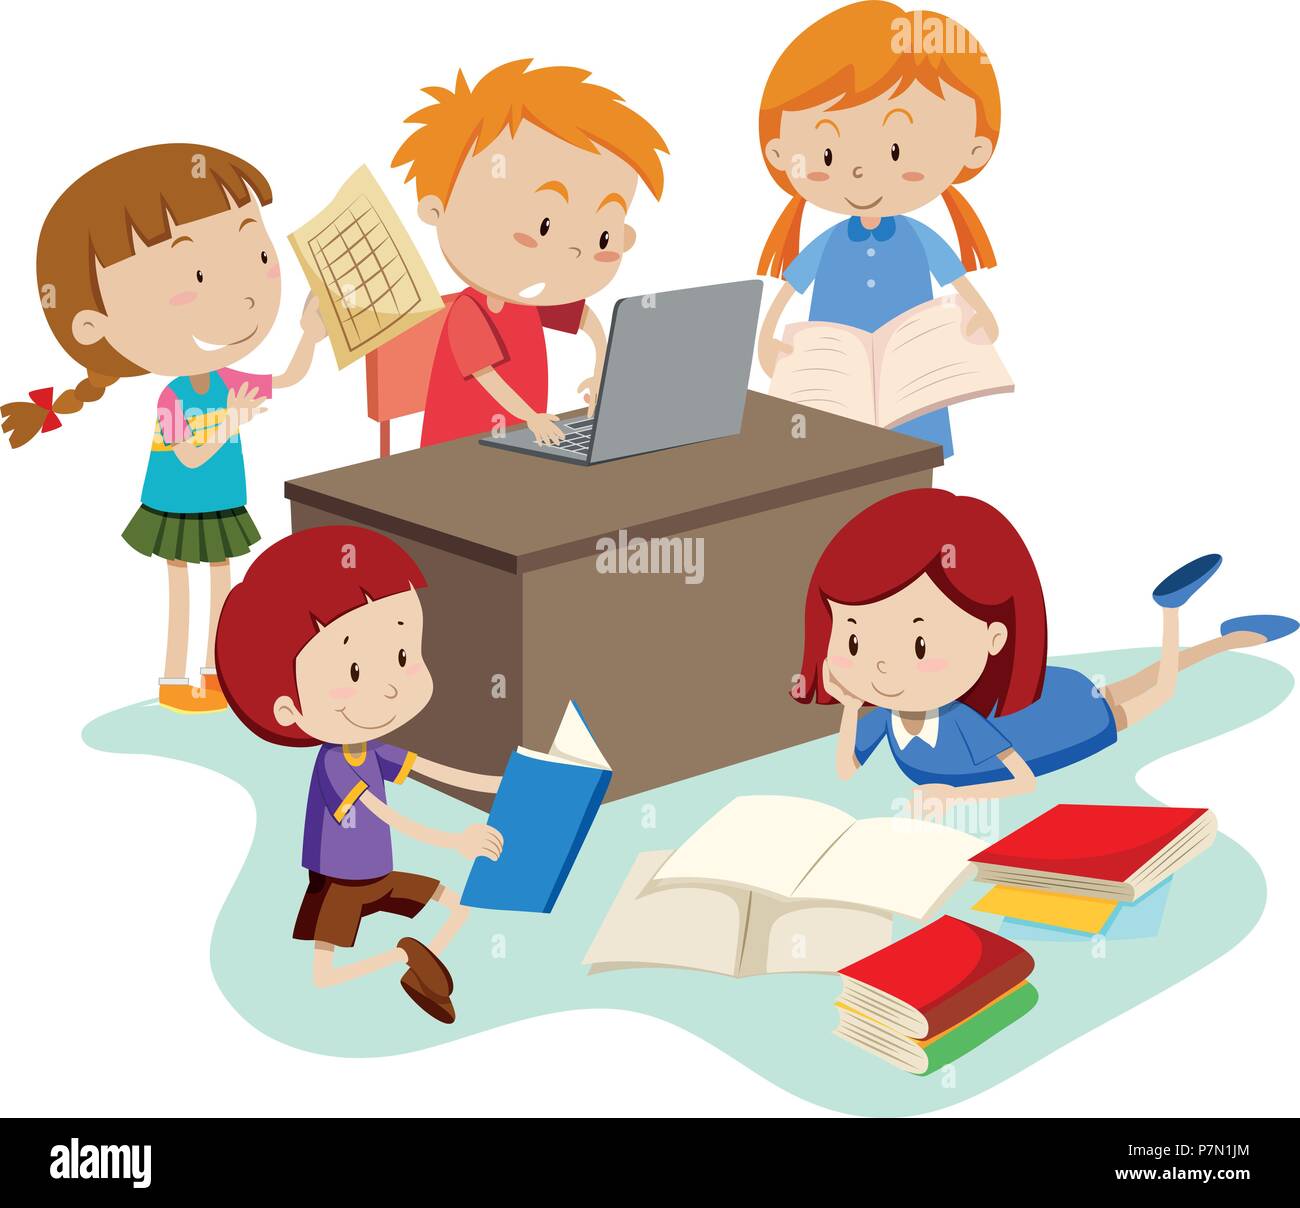 Student Study in Class Room illustration Stock Vector Image & Art - Alamy